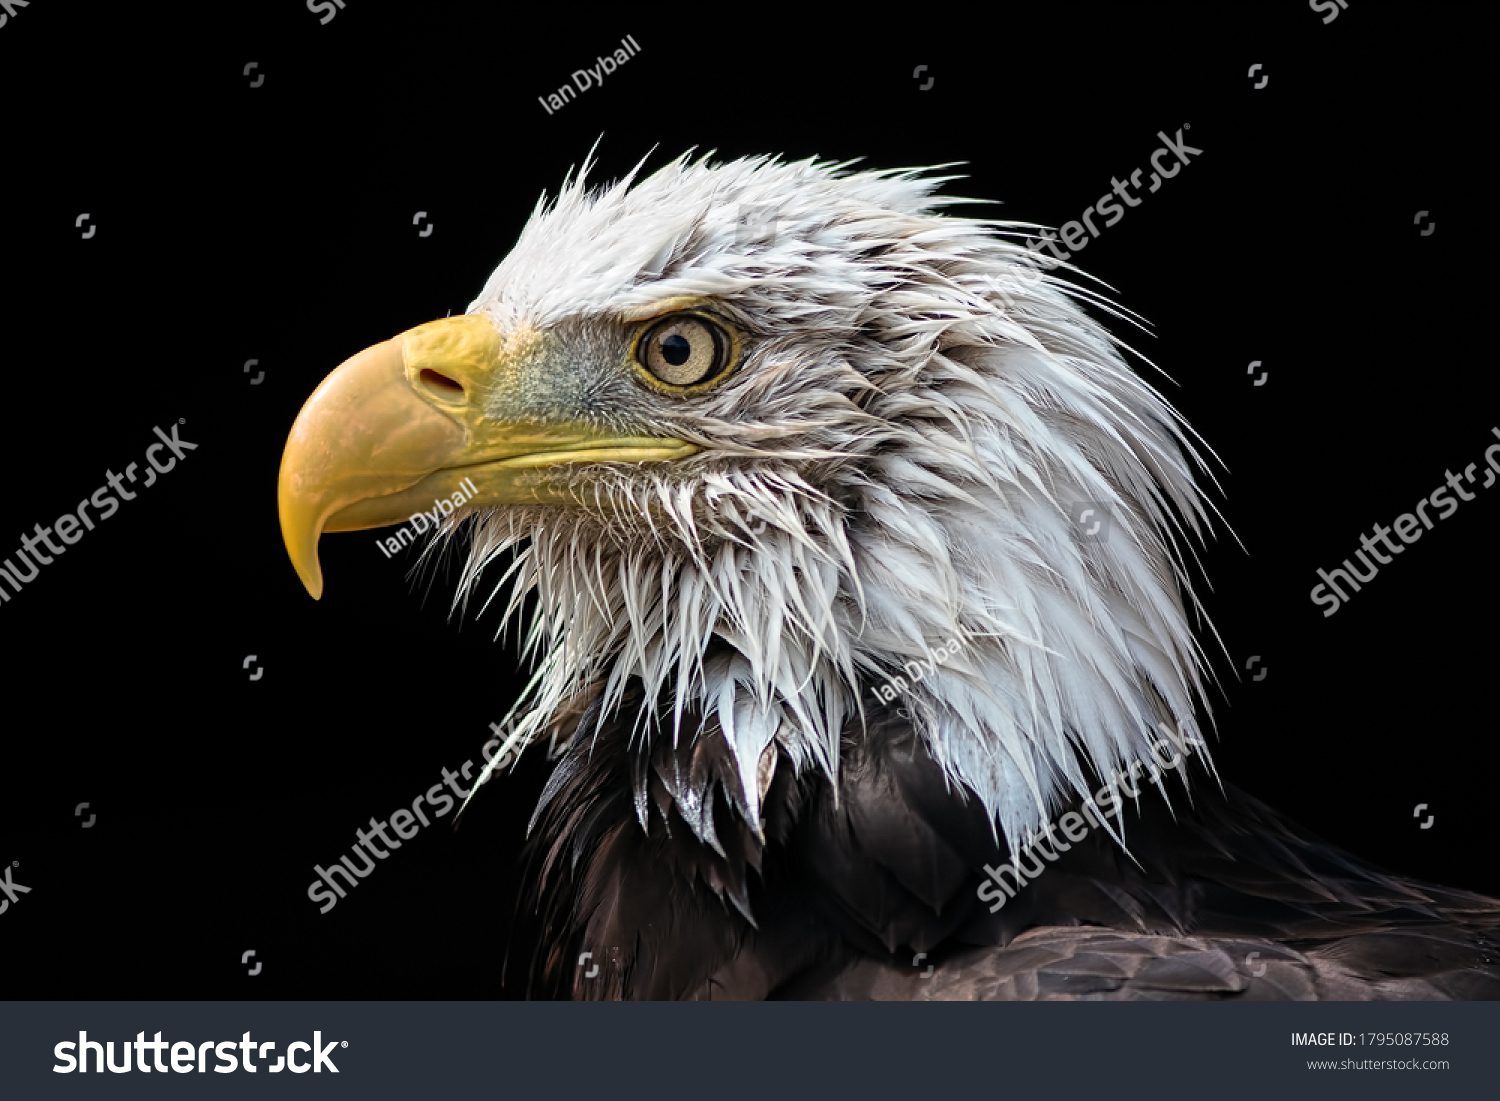 Bald eagle head. American national bird (Haliaeetus leucocephalus) powerful close-up portrait image of this aggressive looking predator. Wet feathers on face in profile isolated on black background. #1795087588